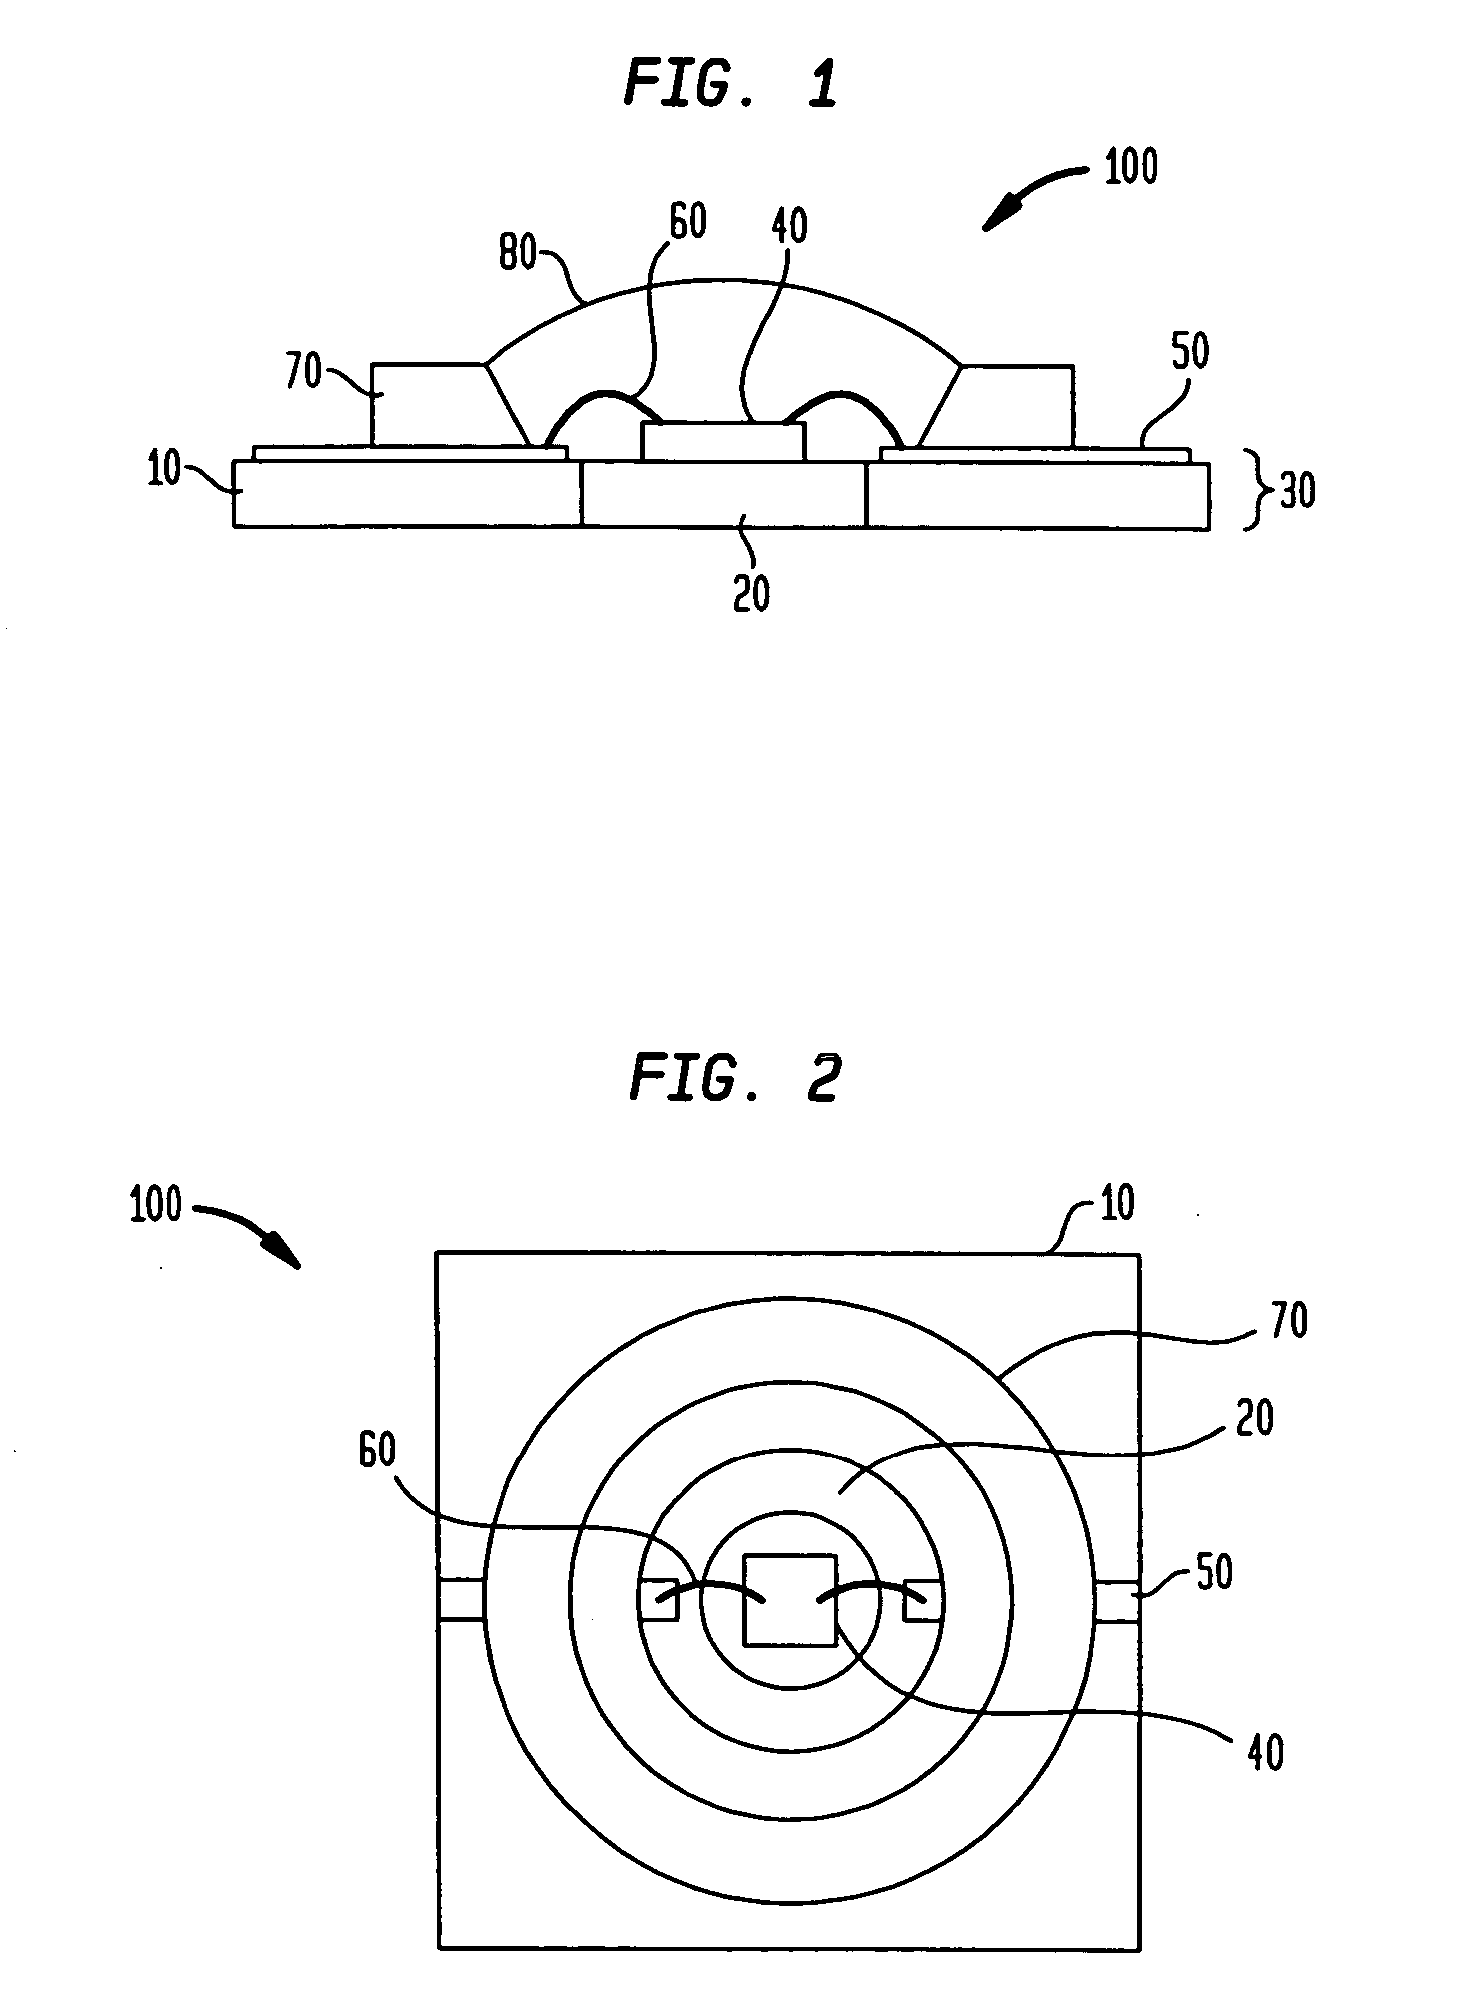 Light emitting diode package and method for making same